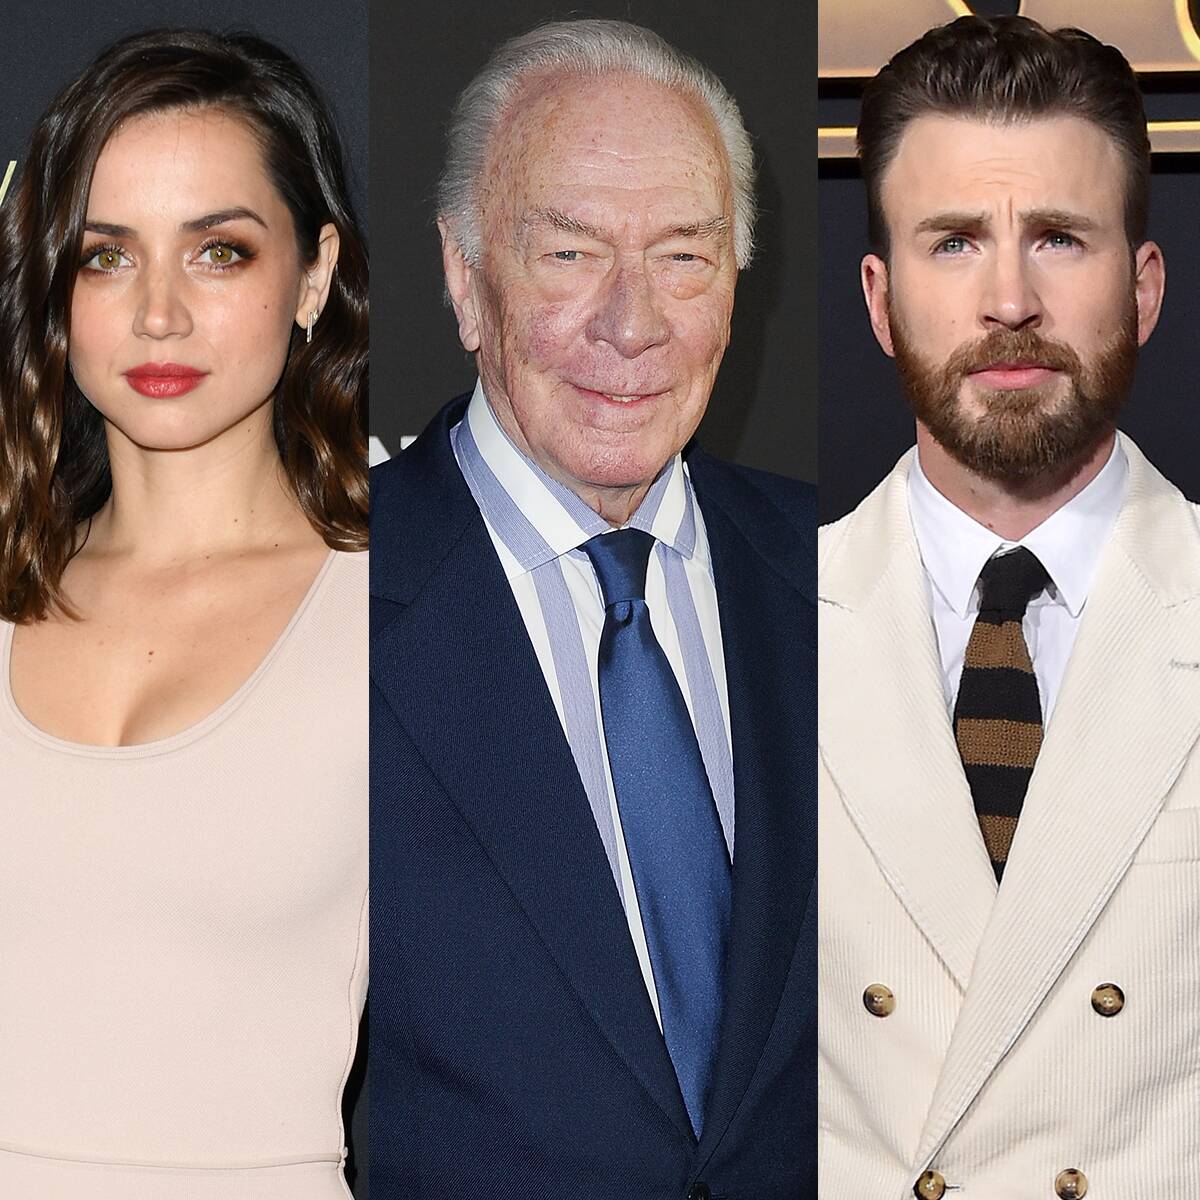 Knives Out Stars Ana de Armas, Chris Evans and More React to Christopher Plummer's Death